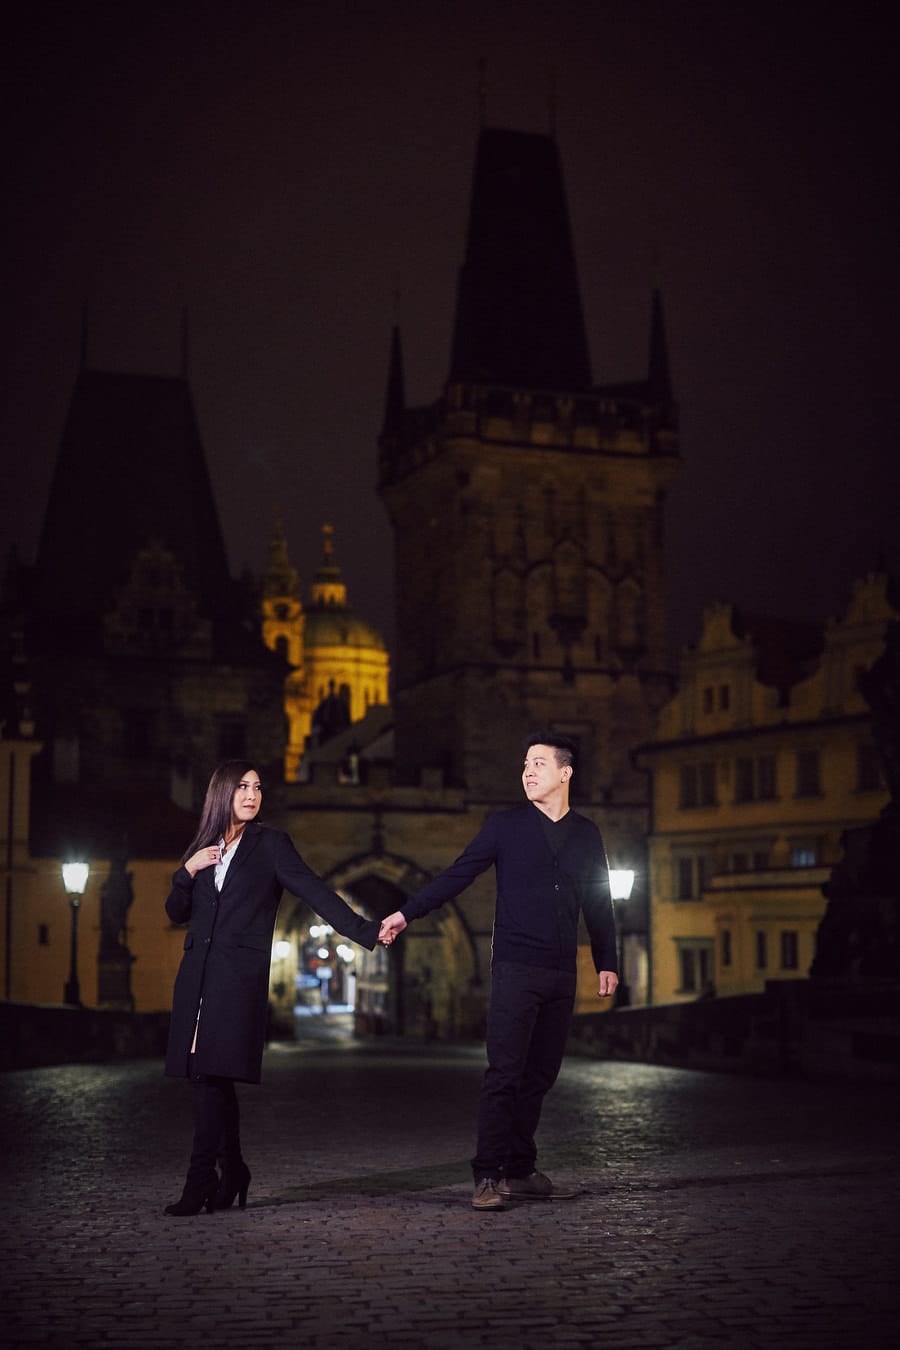 Prague Charles Bridge at night, young couple wearing black, holding hands, gas lamps